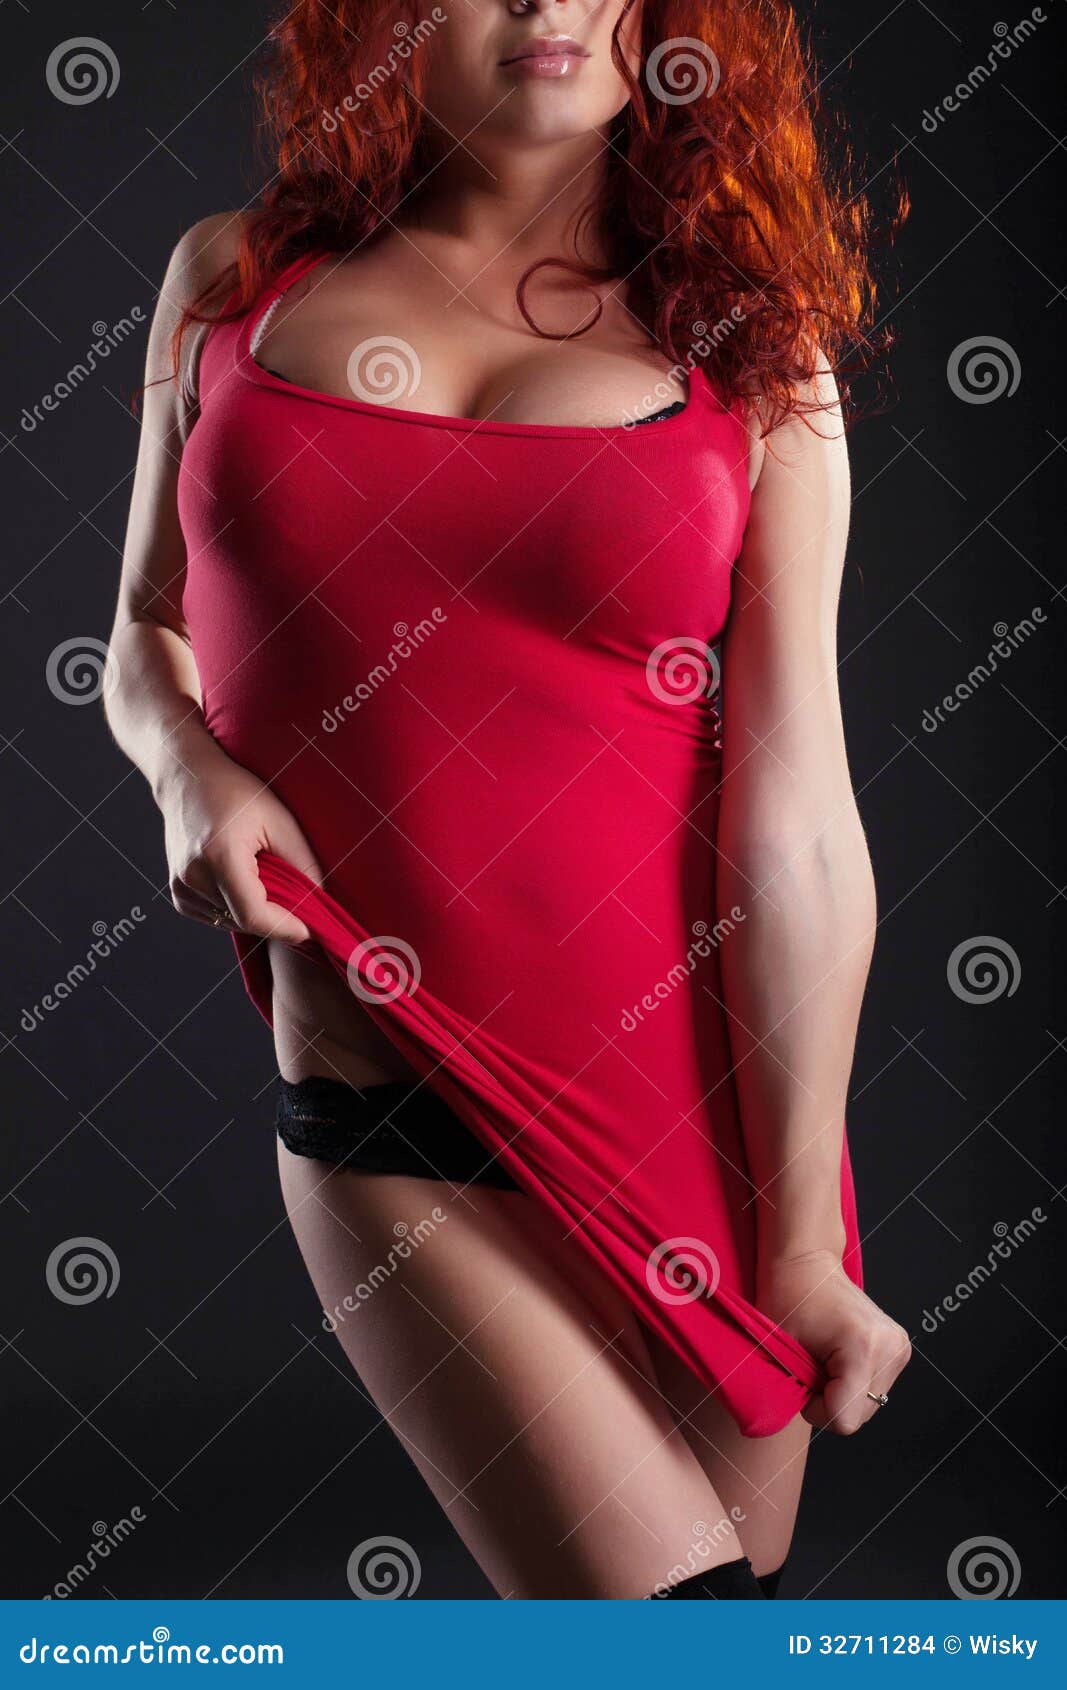 Body of Sexual Passionate Stripper, Close-up Stock Photo pic photo